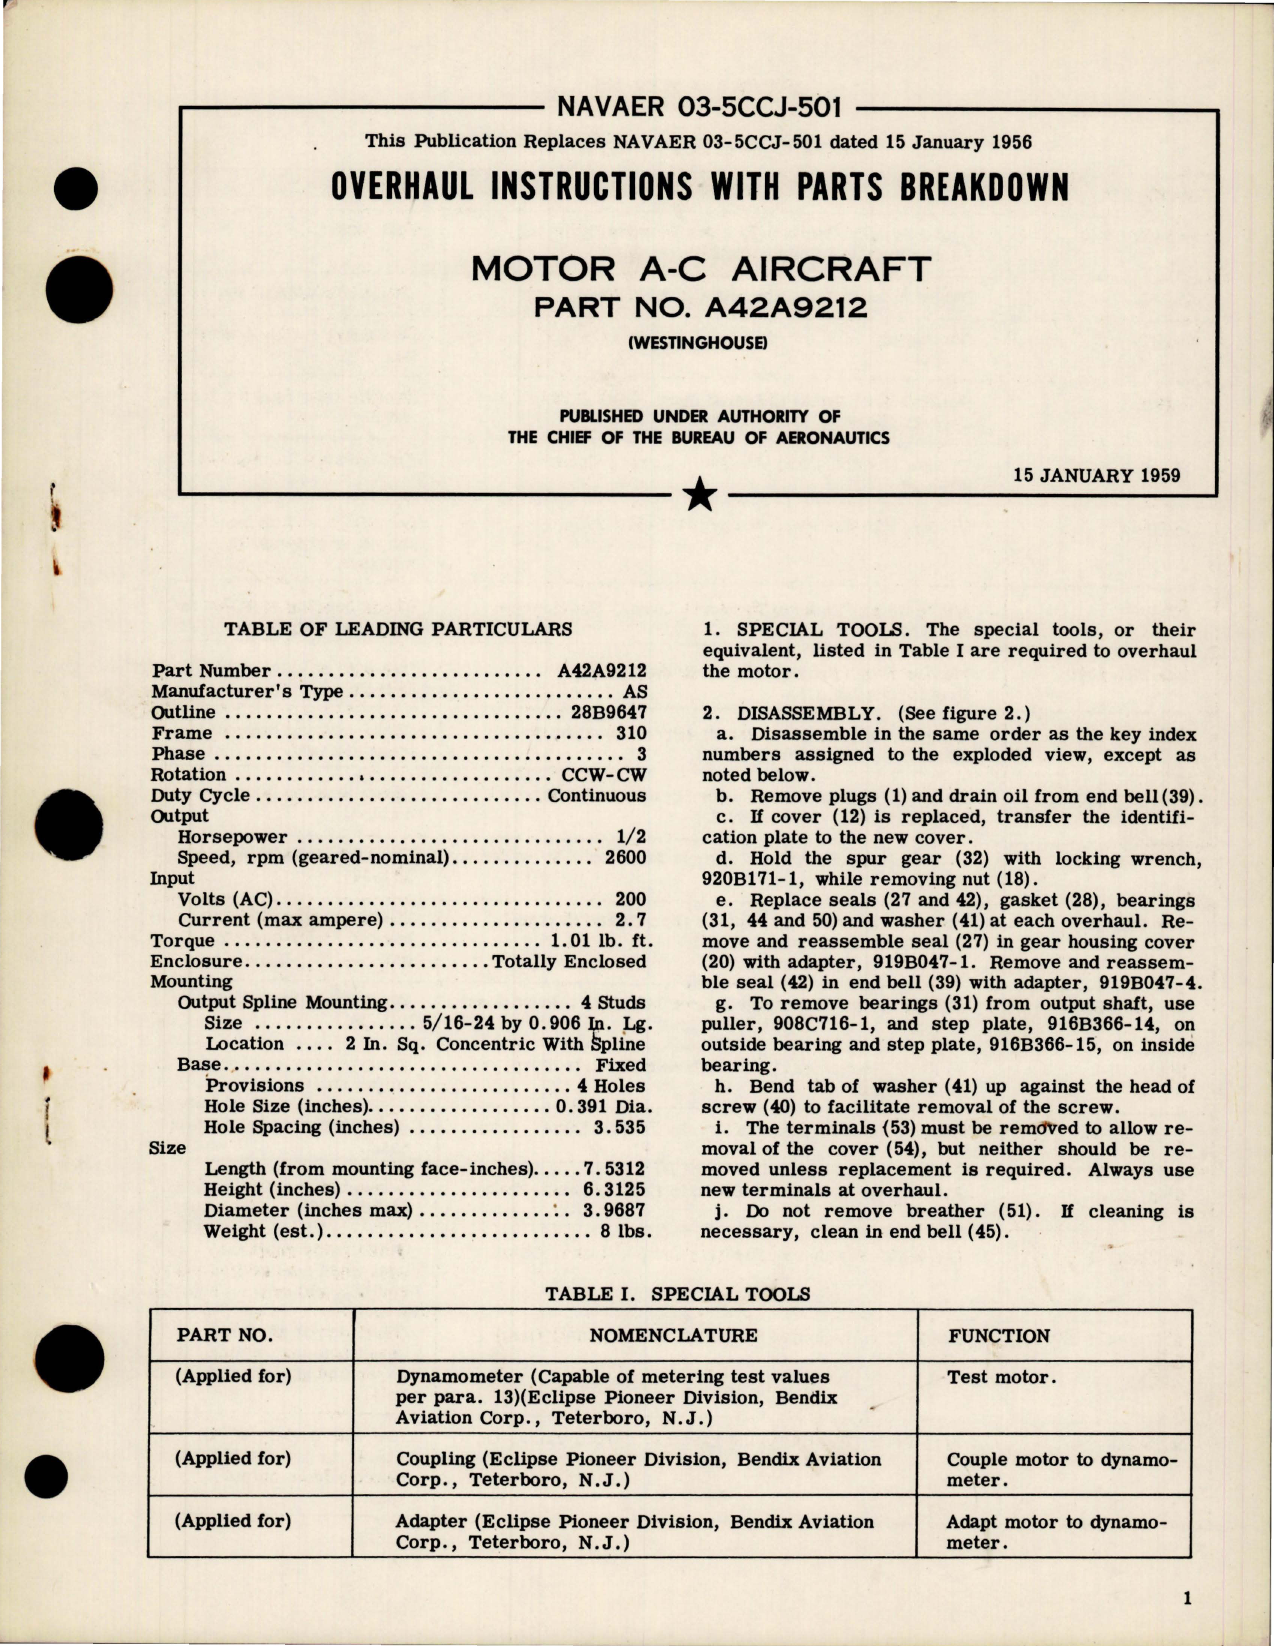 Sample page 1 from AirCorps Library document: Overhaul Instructions with Parts Breakdown for AC Aircraft Motor - Part A24A9212 